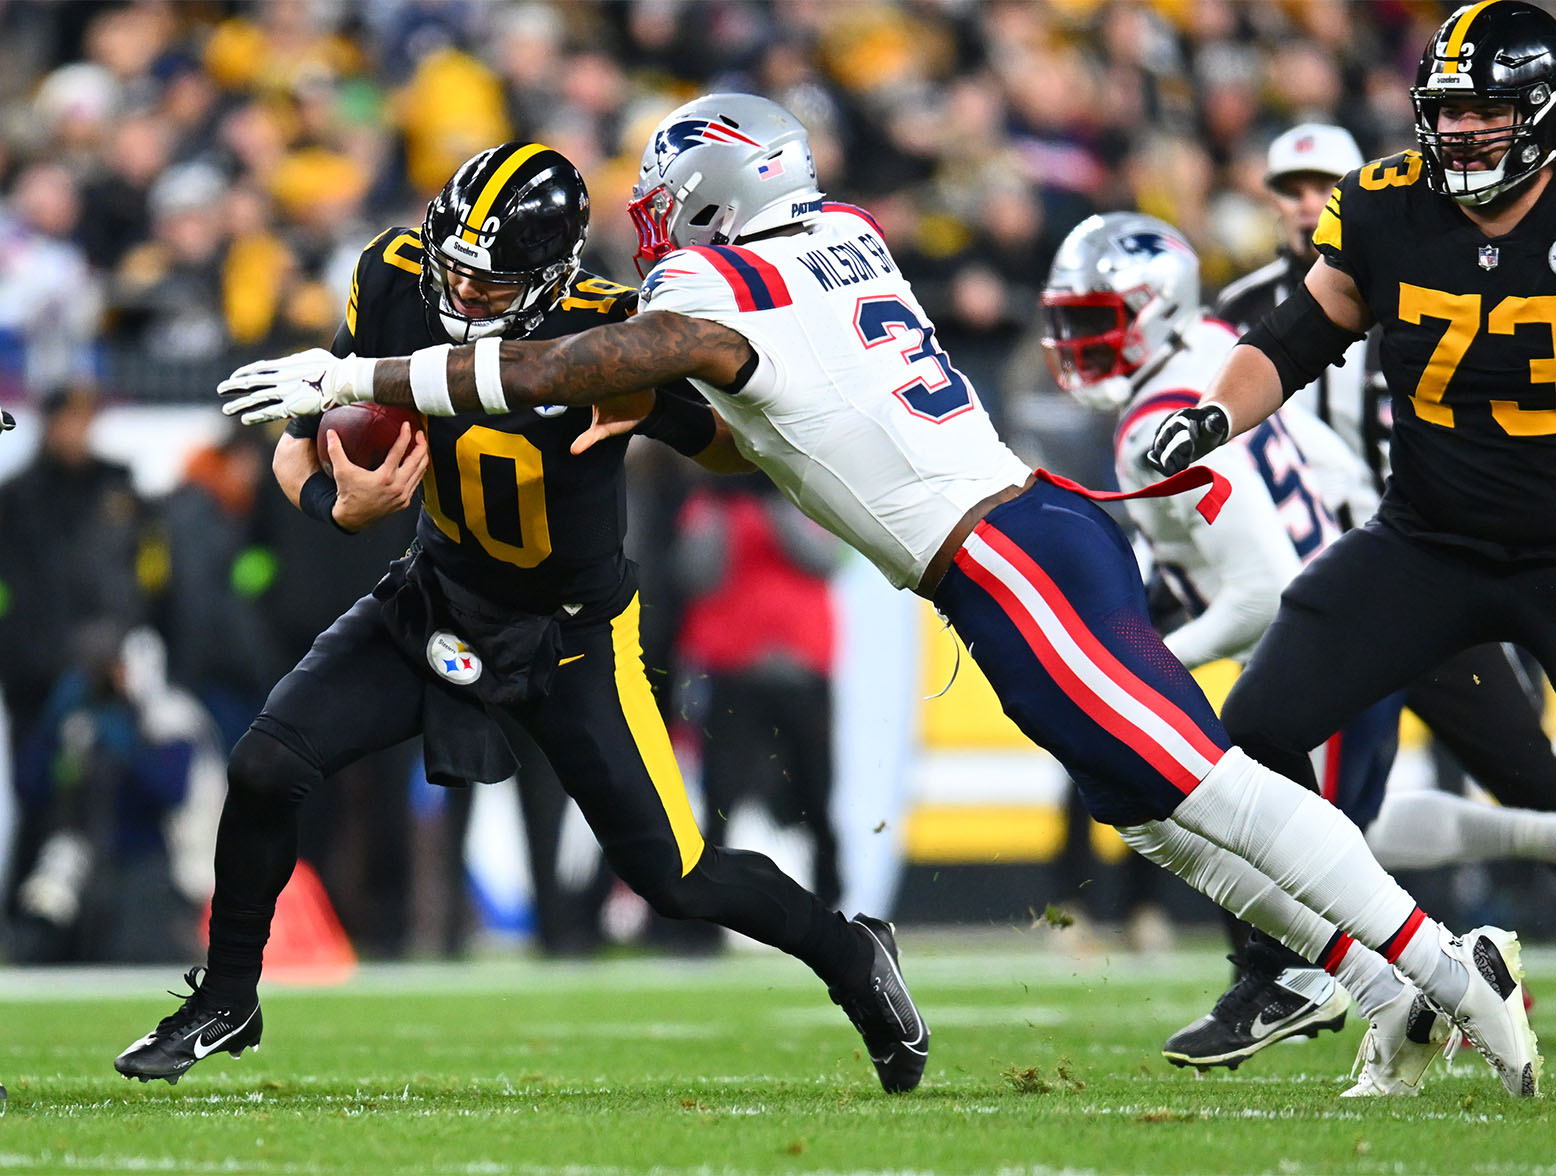 PITTSBURGH, PENNSYLVANIA - DECEMBER 07: Linebacker Mack Wilson Sr. (3) of the New England Patriots sacks quarterback Mitch Trubisky (10) of the Pittsburgh Steelers in the first half at Acrisure Stadium on December 07, 2023 in Pittsburgh, Pennsylvania. (Photo by Joe Sargent/Getty Images)